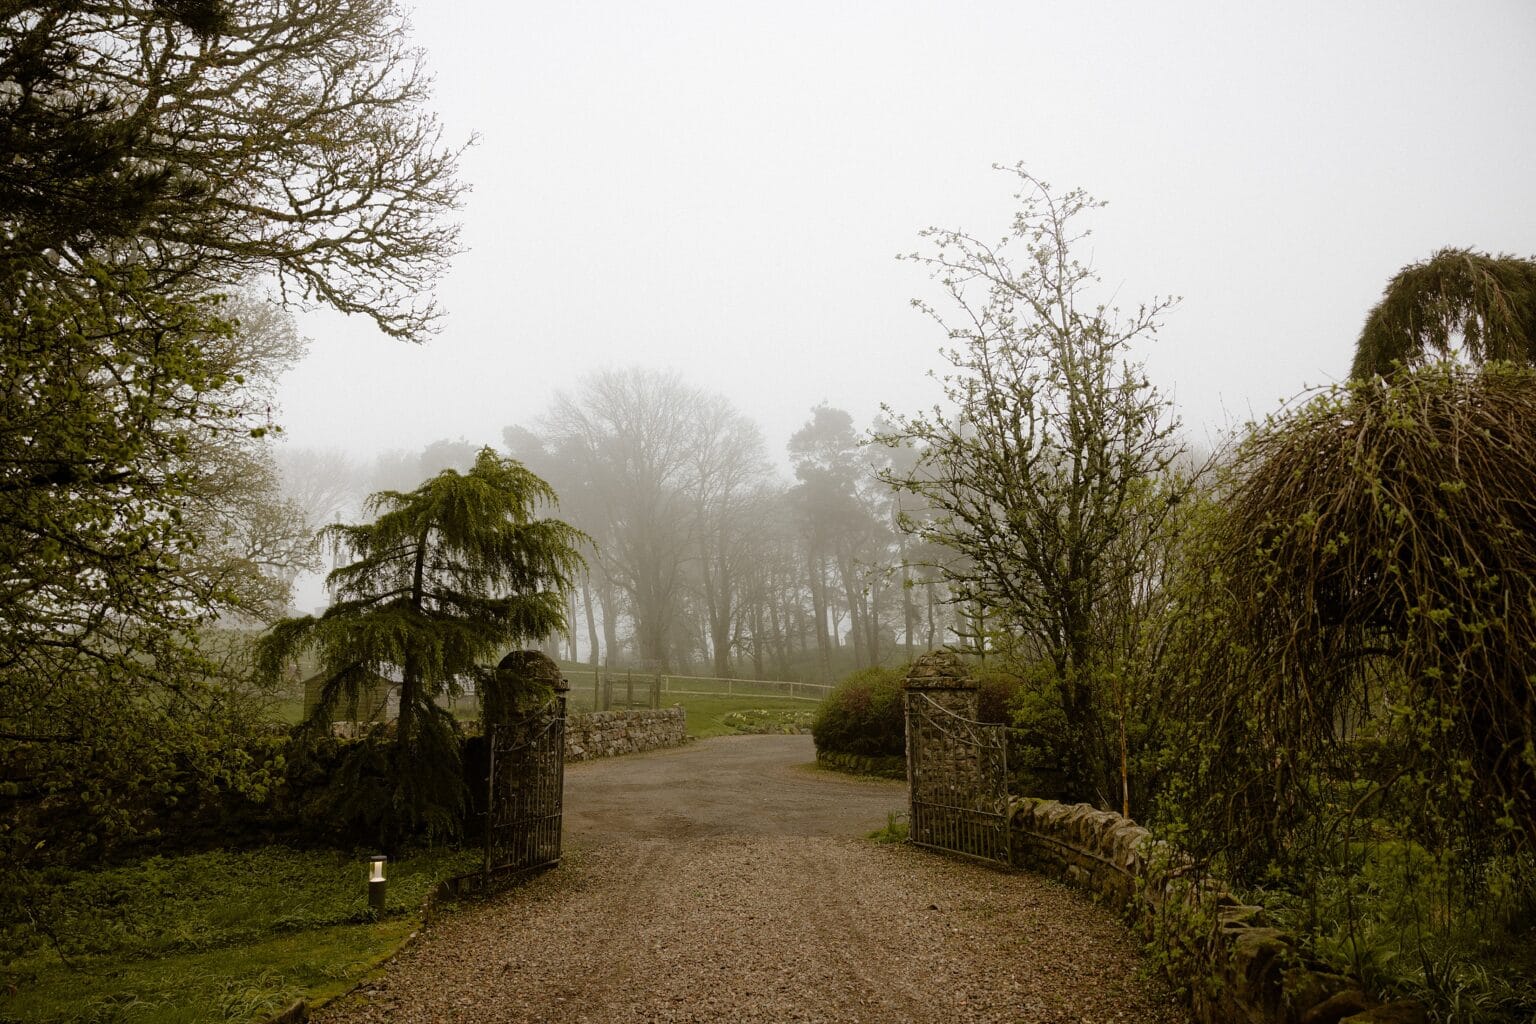 exterior outside view of a path and gate at the entrance to barn wedding venues west lothian scotland on a foggy spring morning